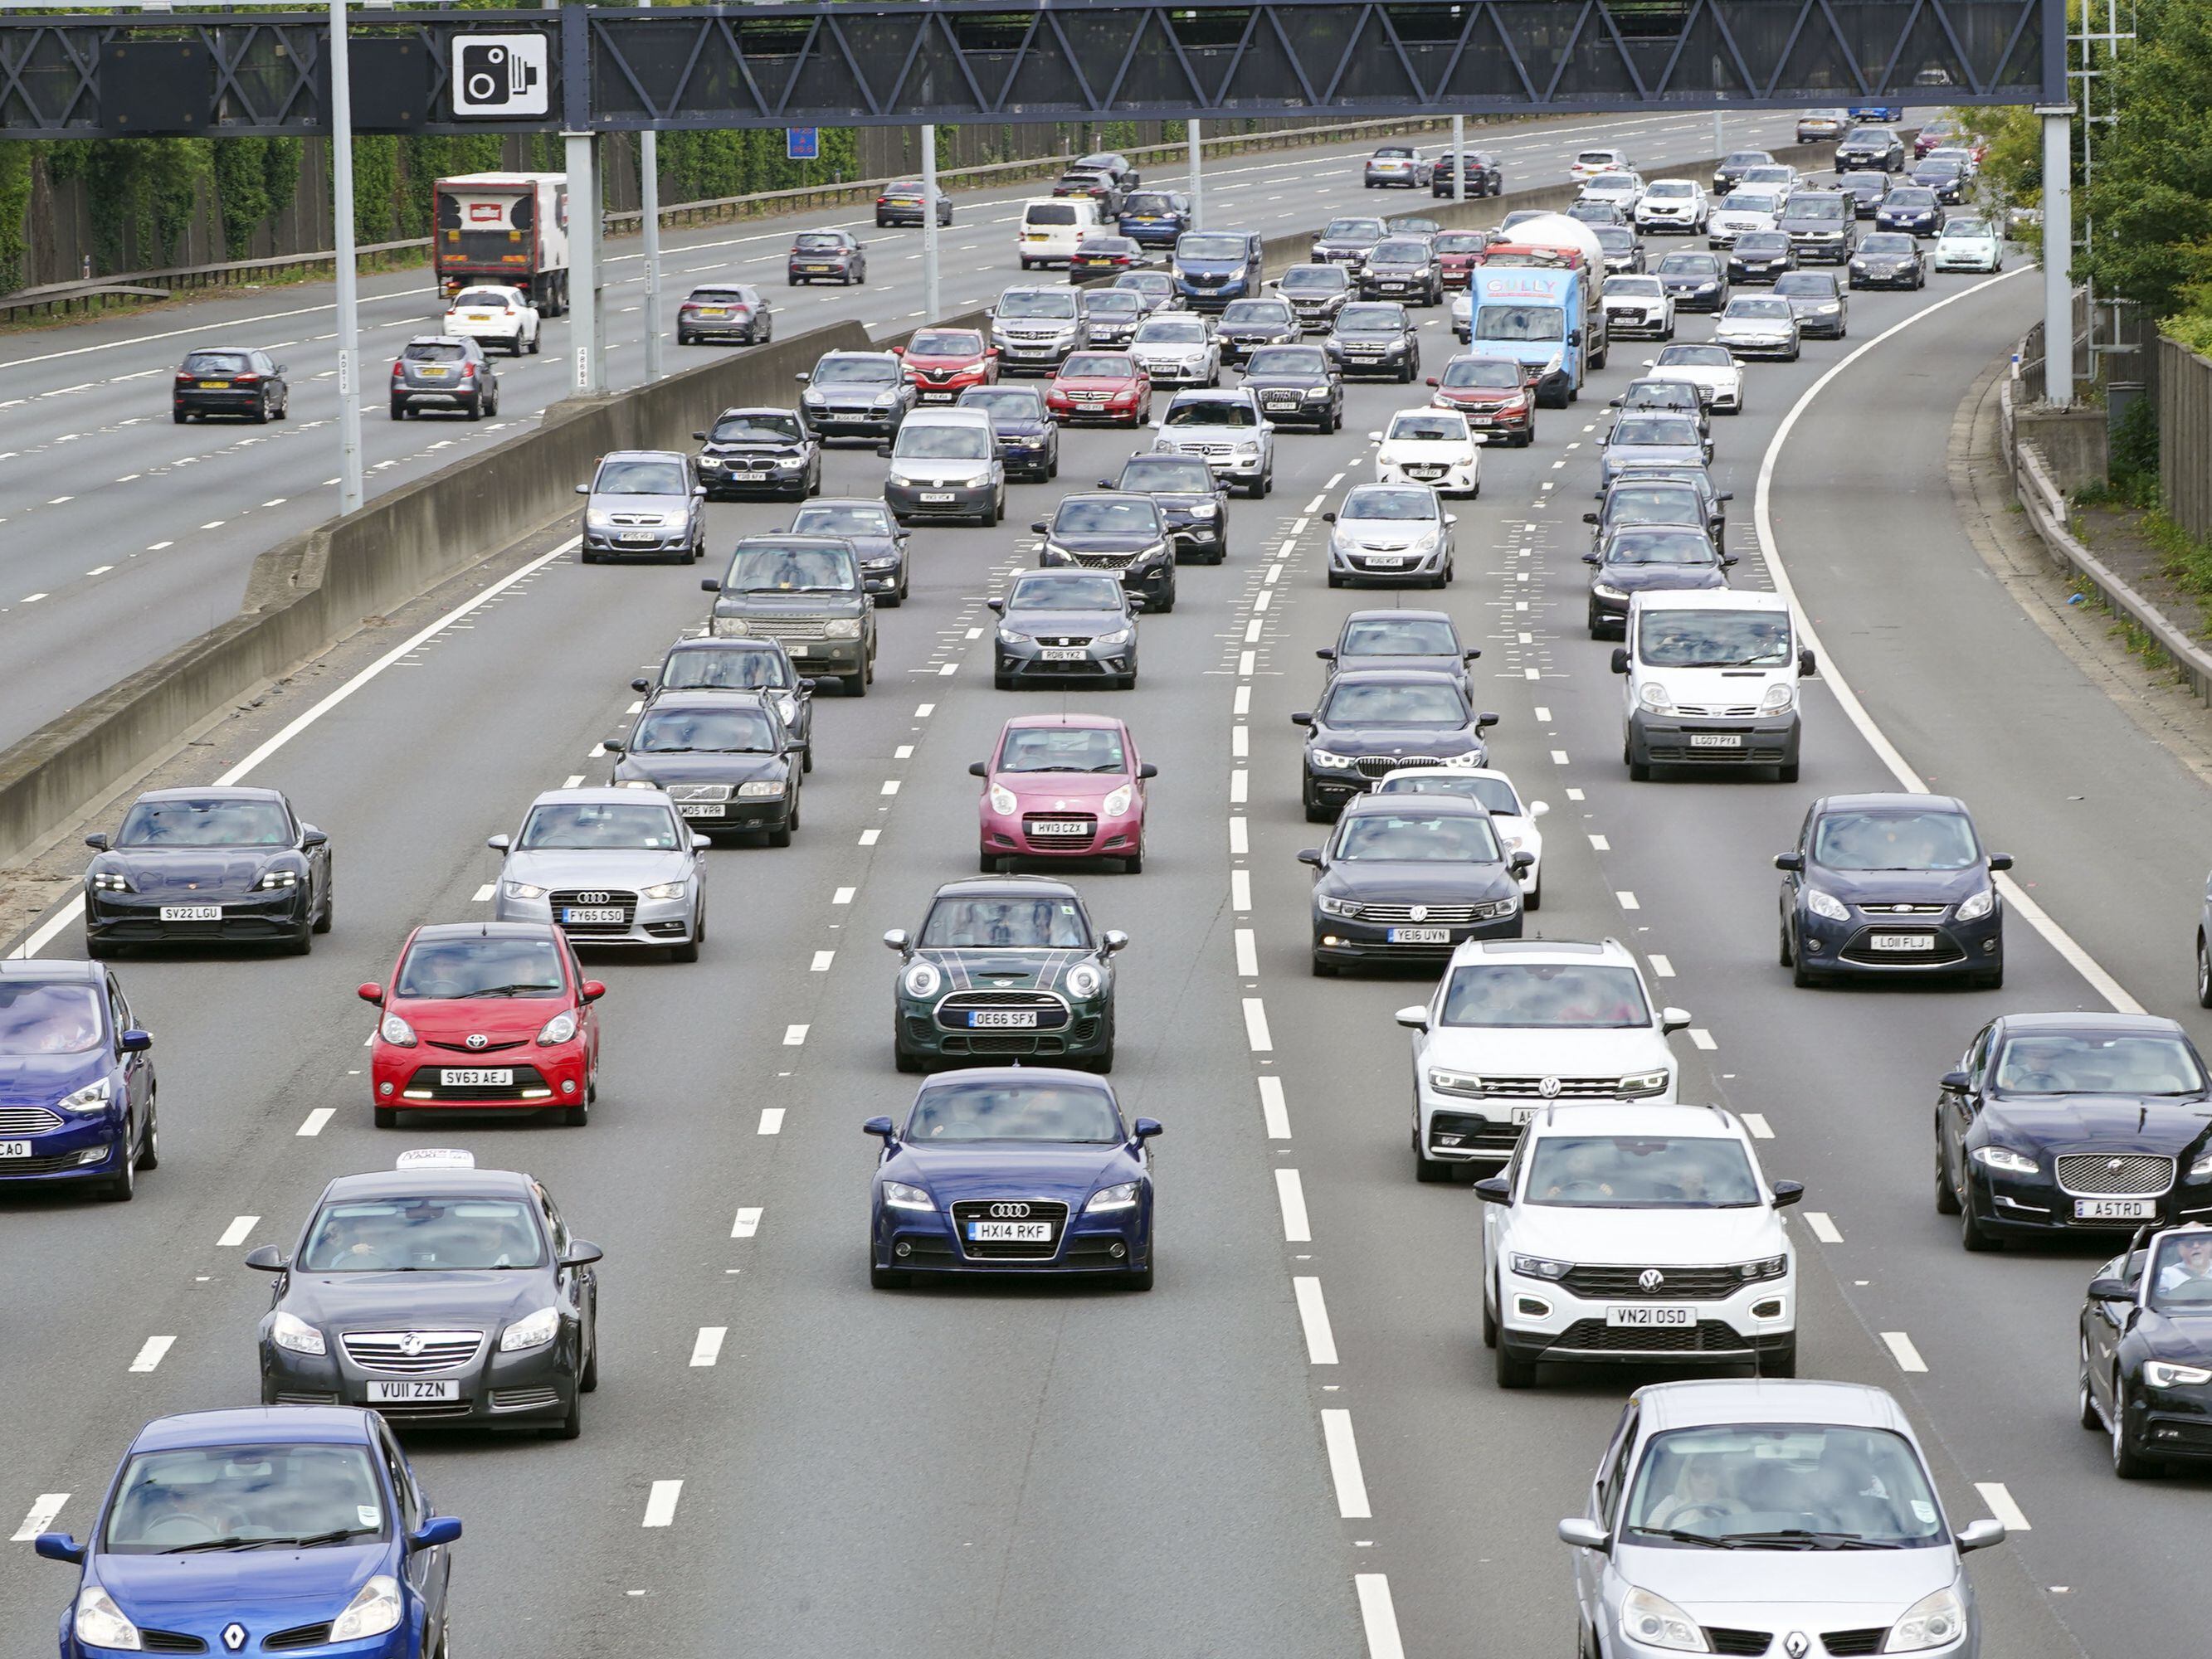 Hope at last that car insurance premiums in the West Midlands could finally be coming down